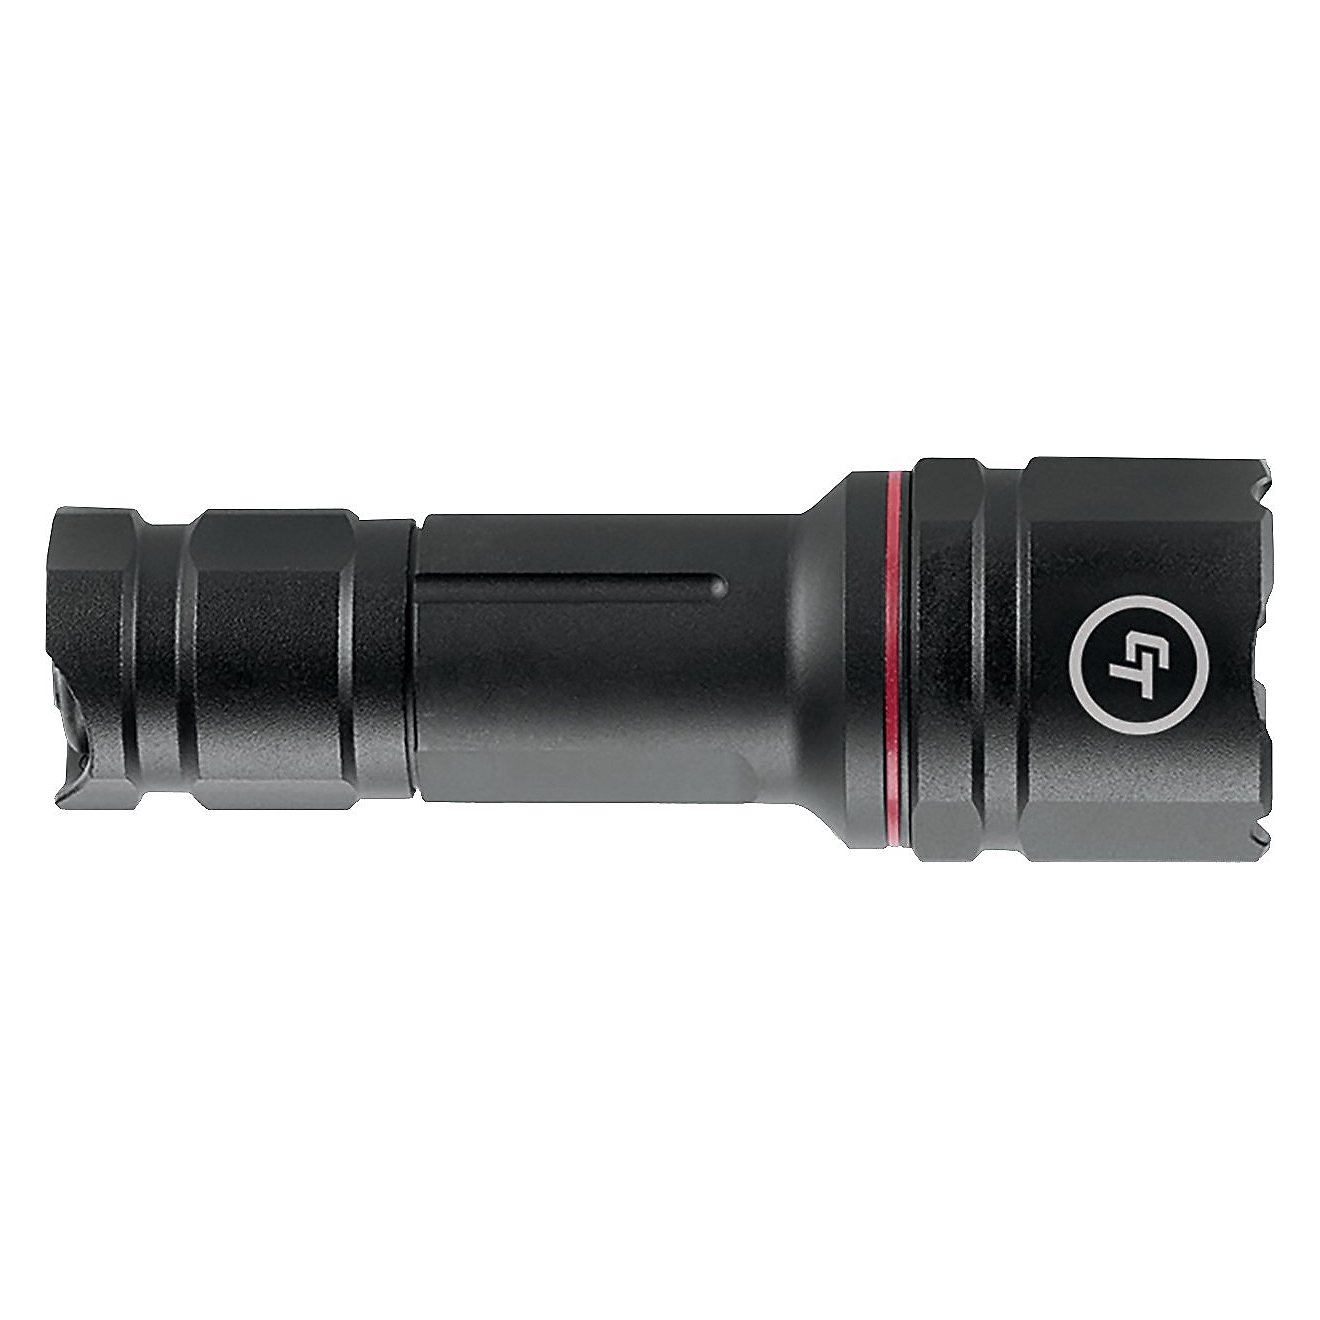 Crimson Trace CWL-102 500 Lumen Tactical Light for Rail-Equipped Long Guns                                                       - view number 1